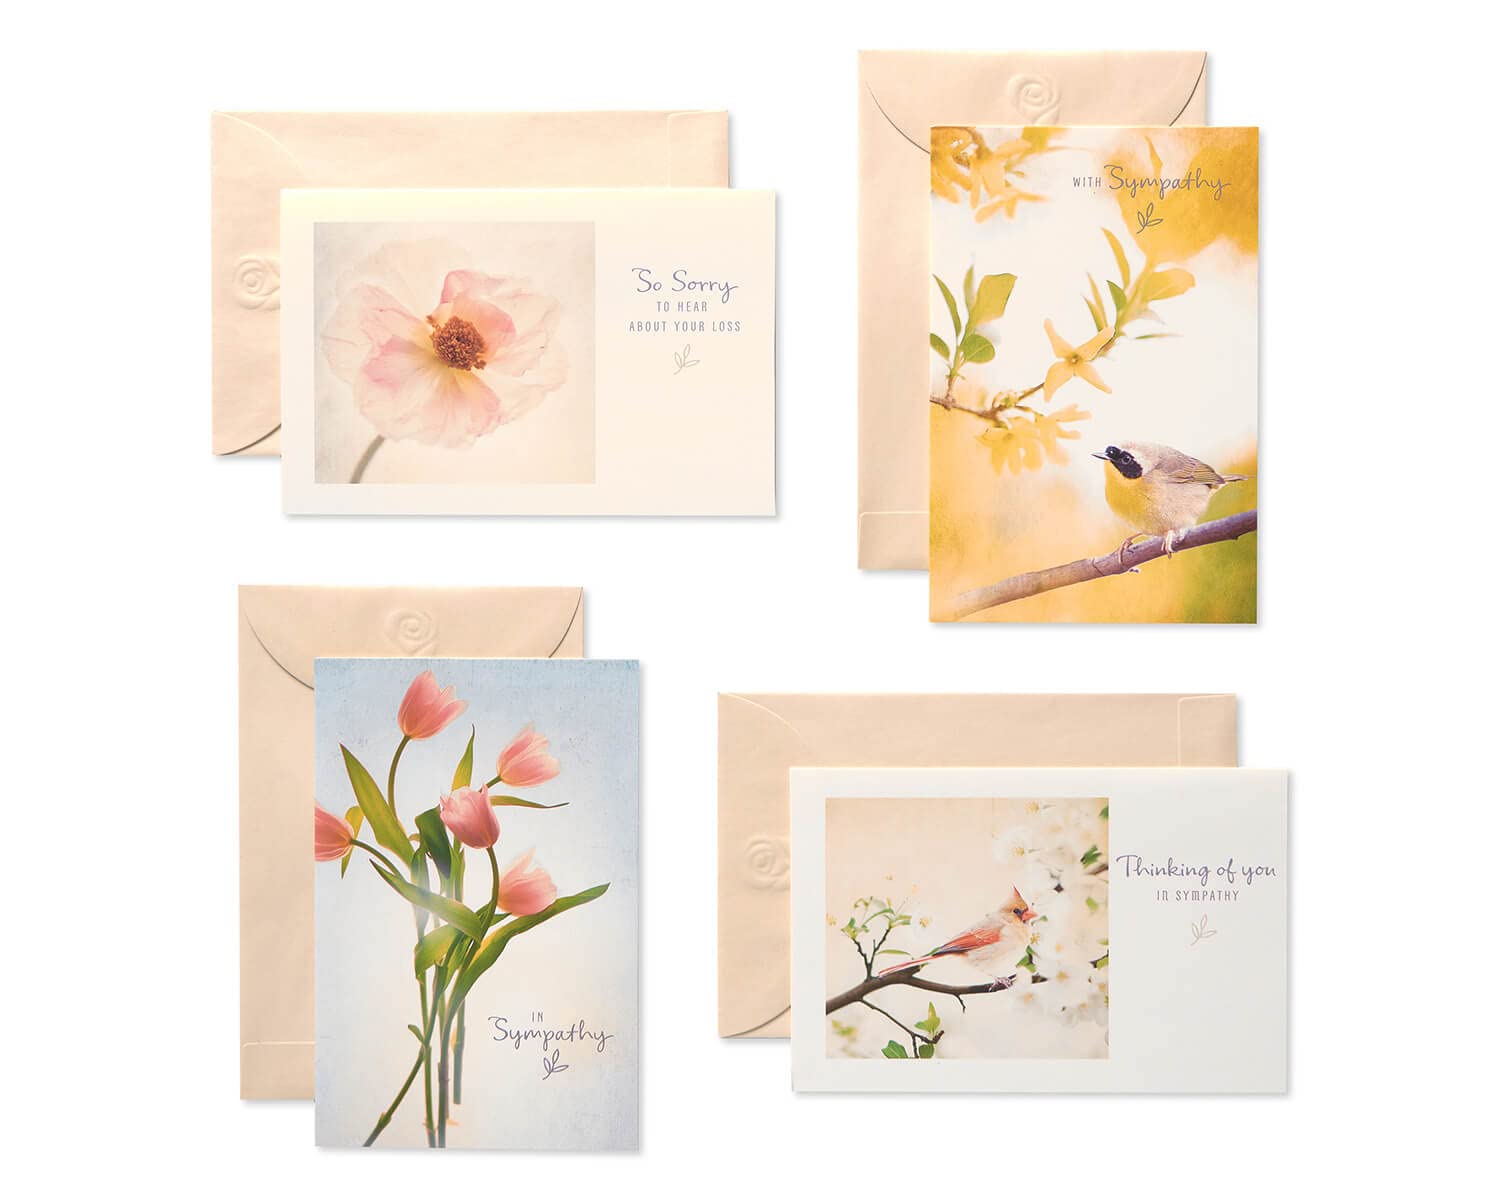 American Greetings Sympathy Cards Assortment with Envelopes, Floral (12-Count)